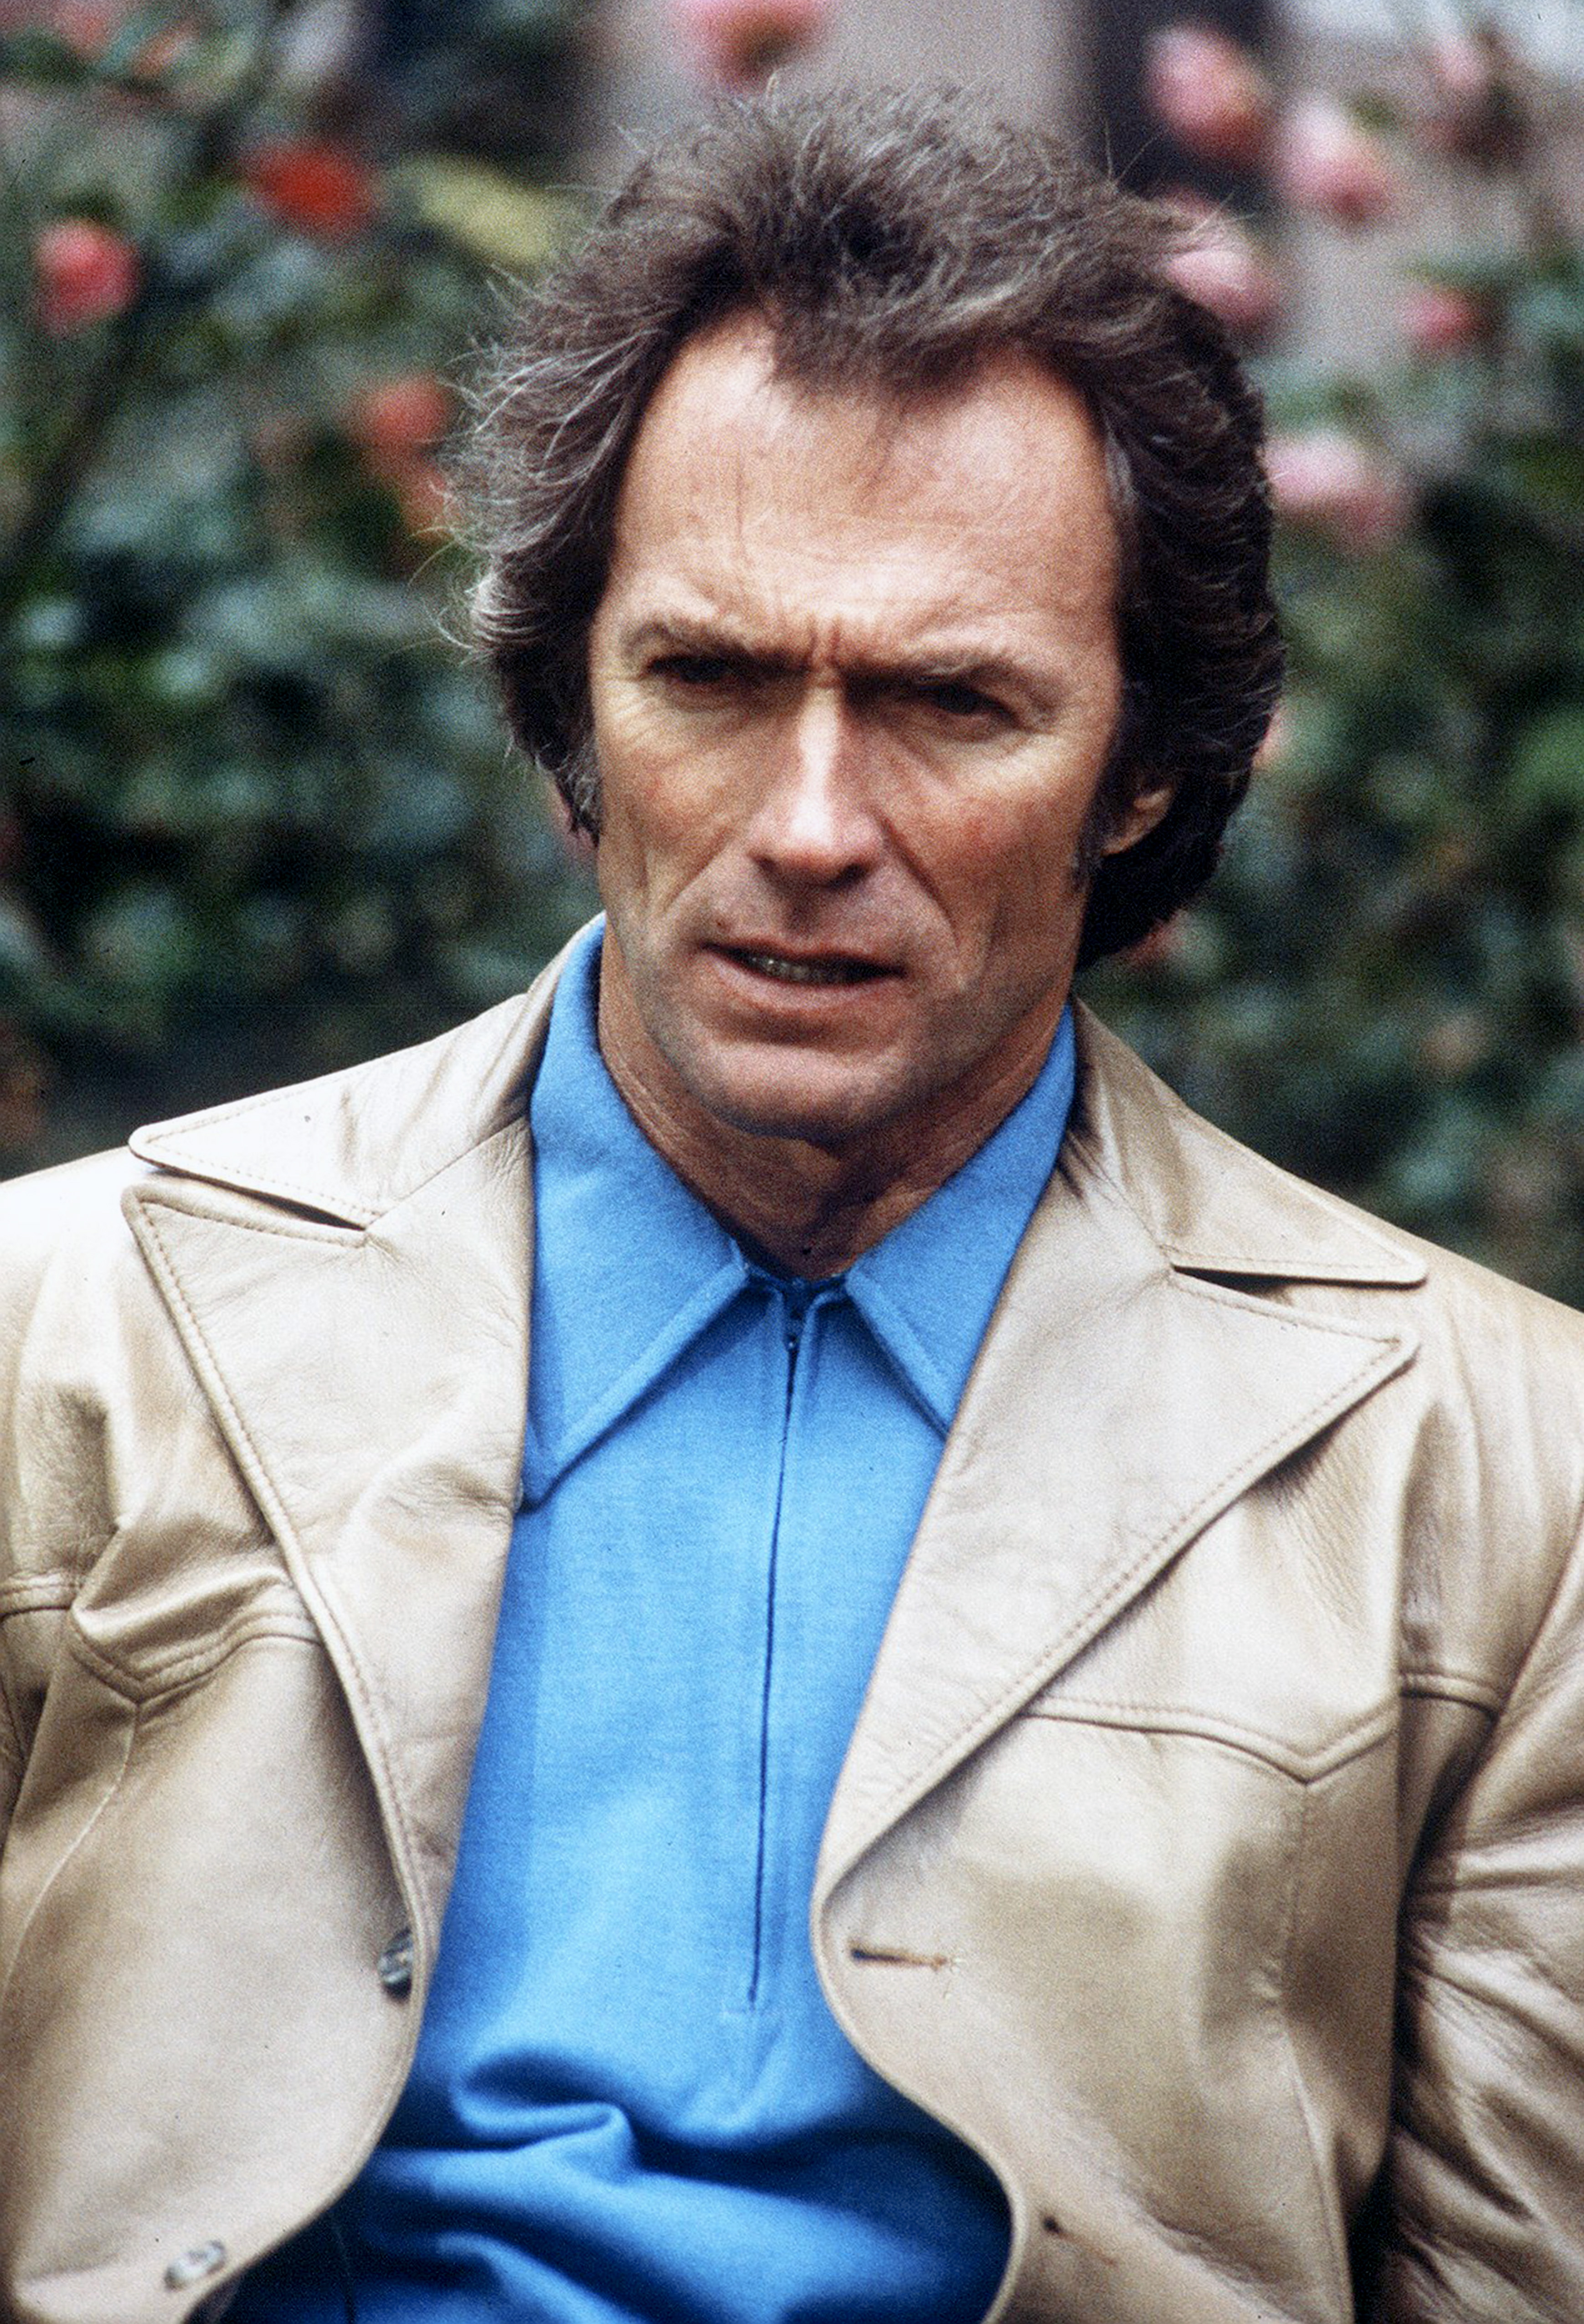 Clint Eastwood circa 1978 | Source: Getty Images